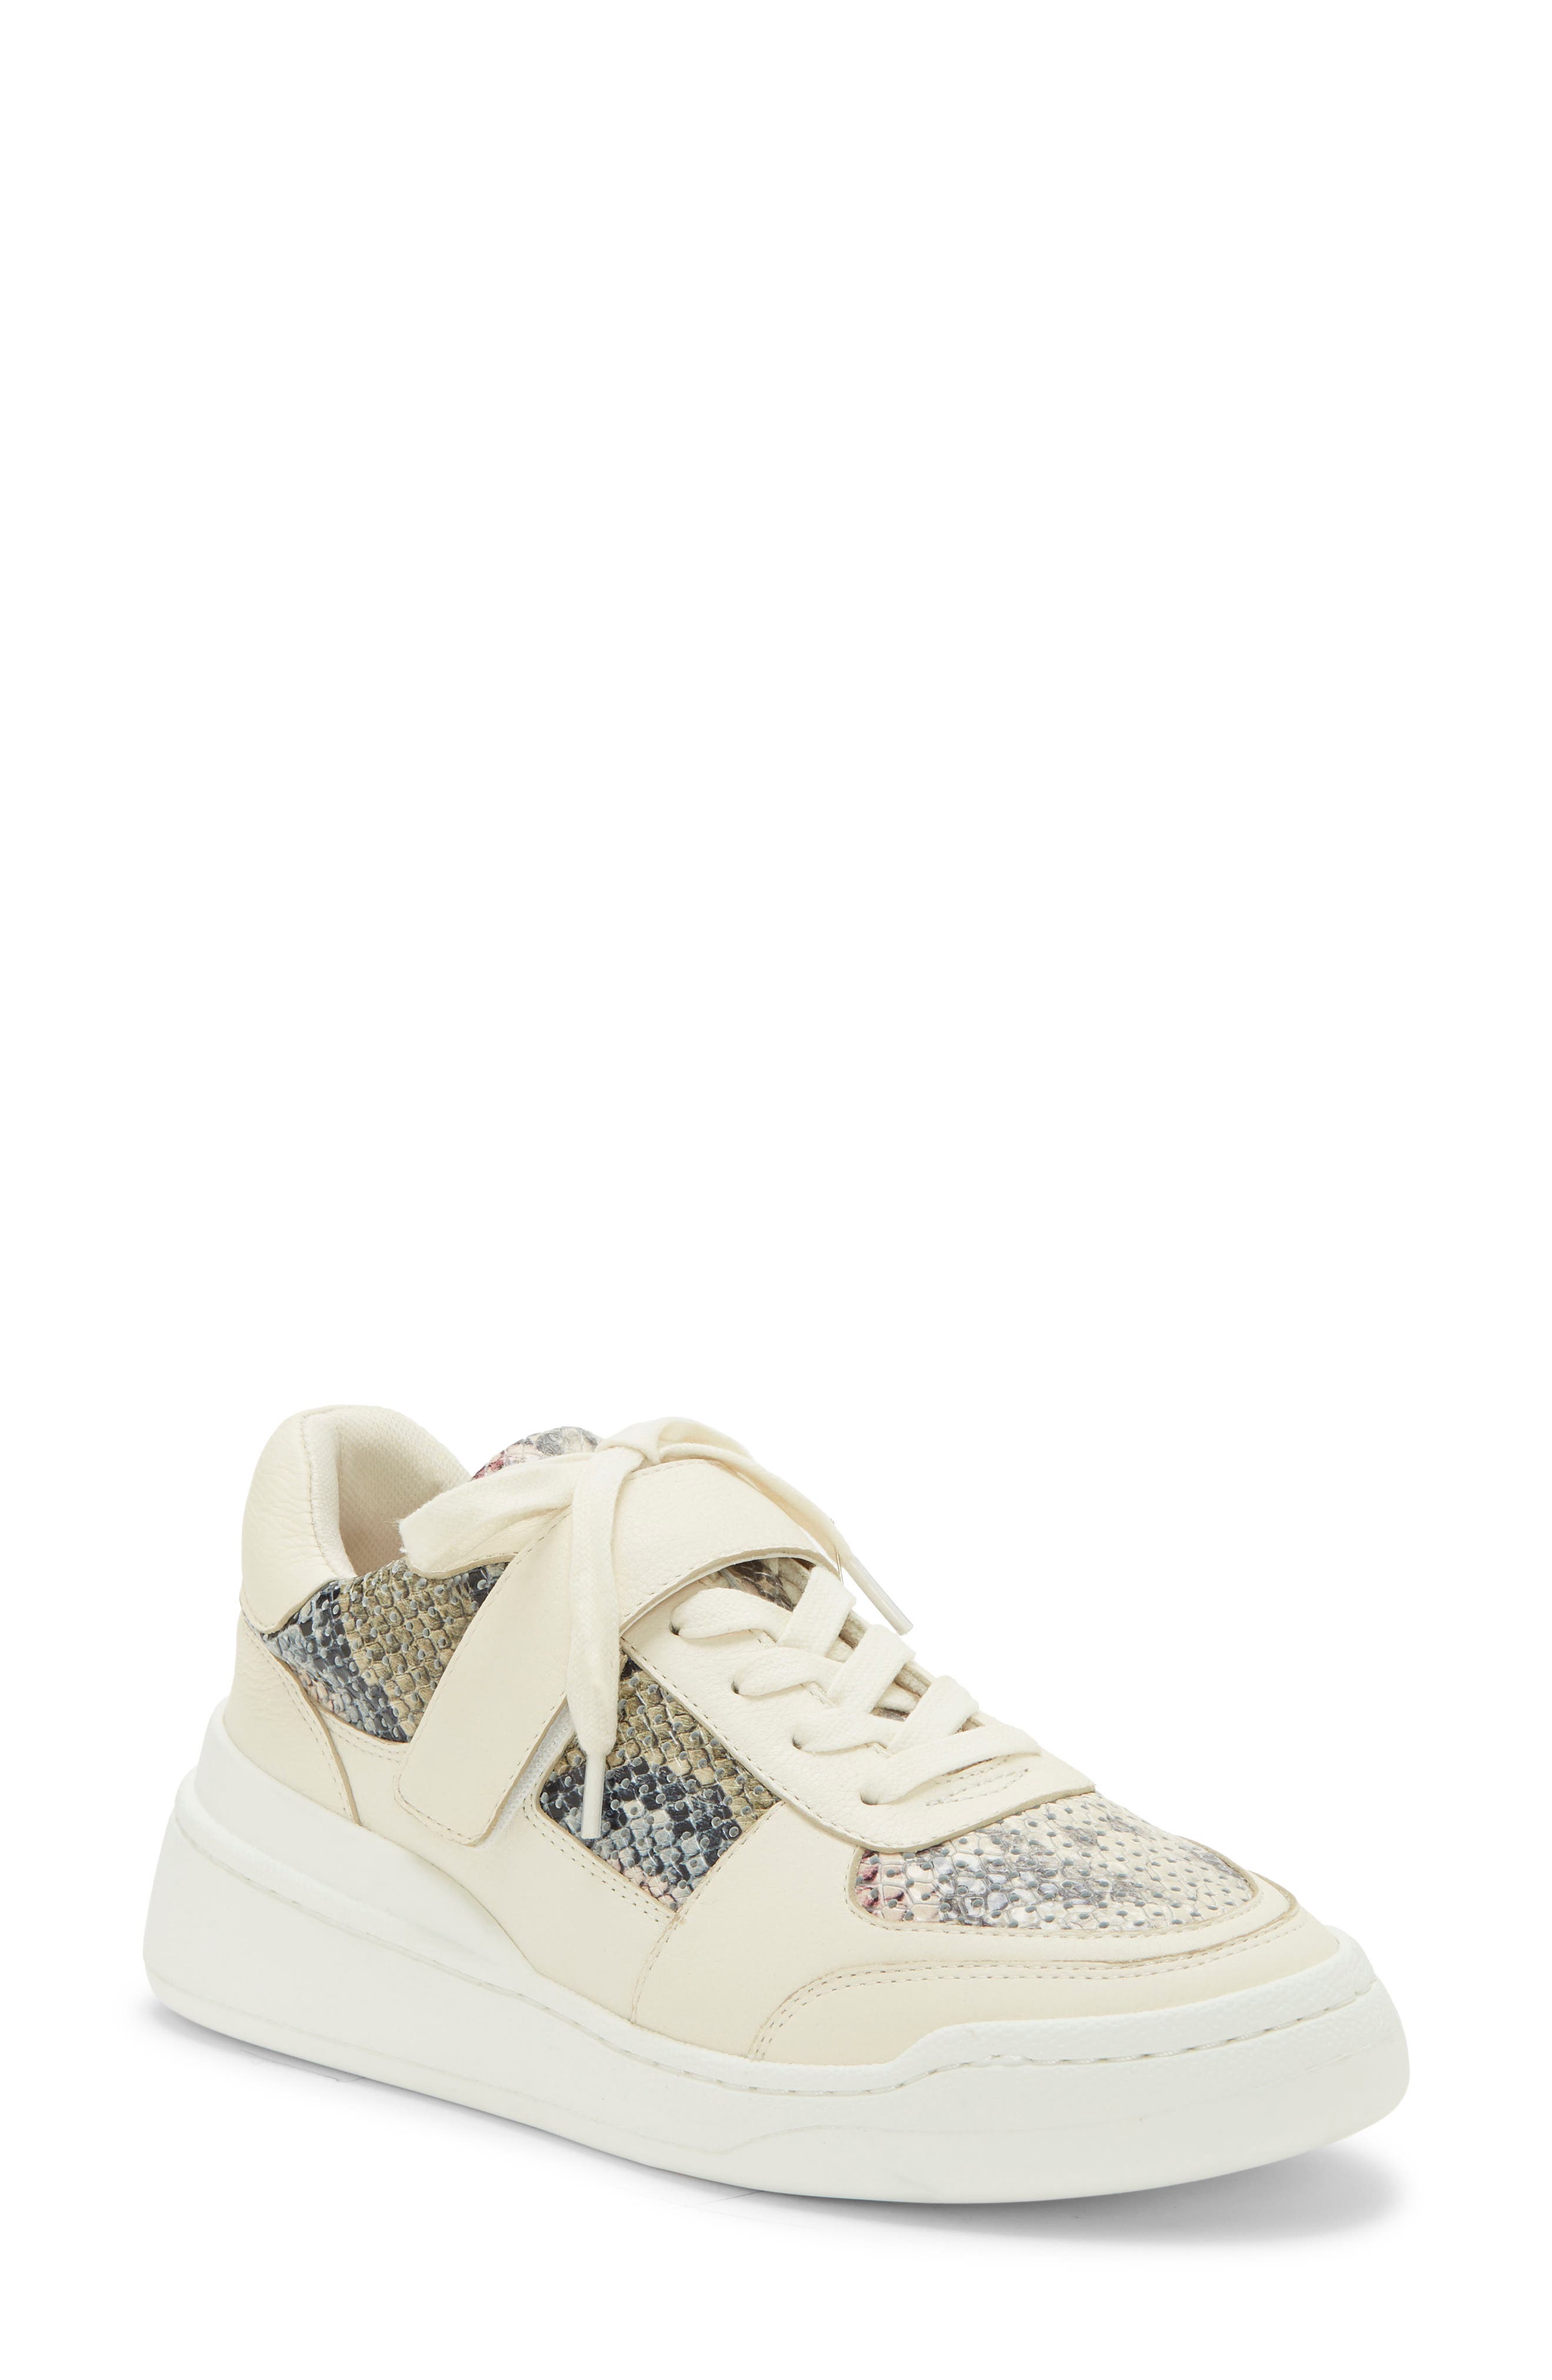 Women's Vince Camuto Sneakers 